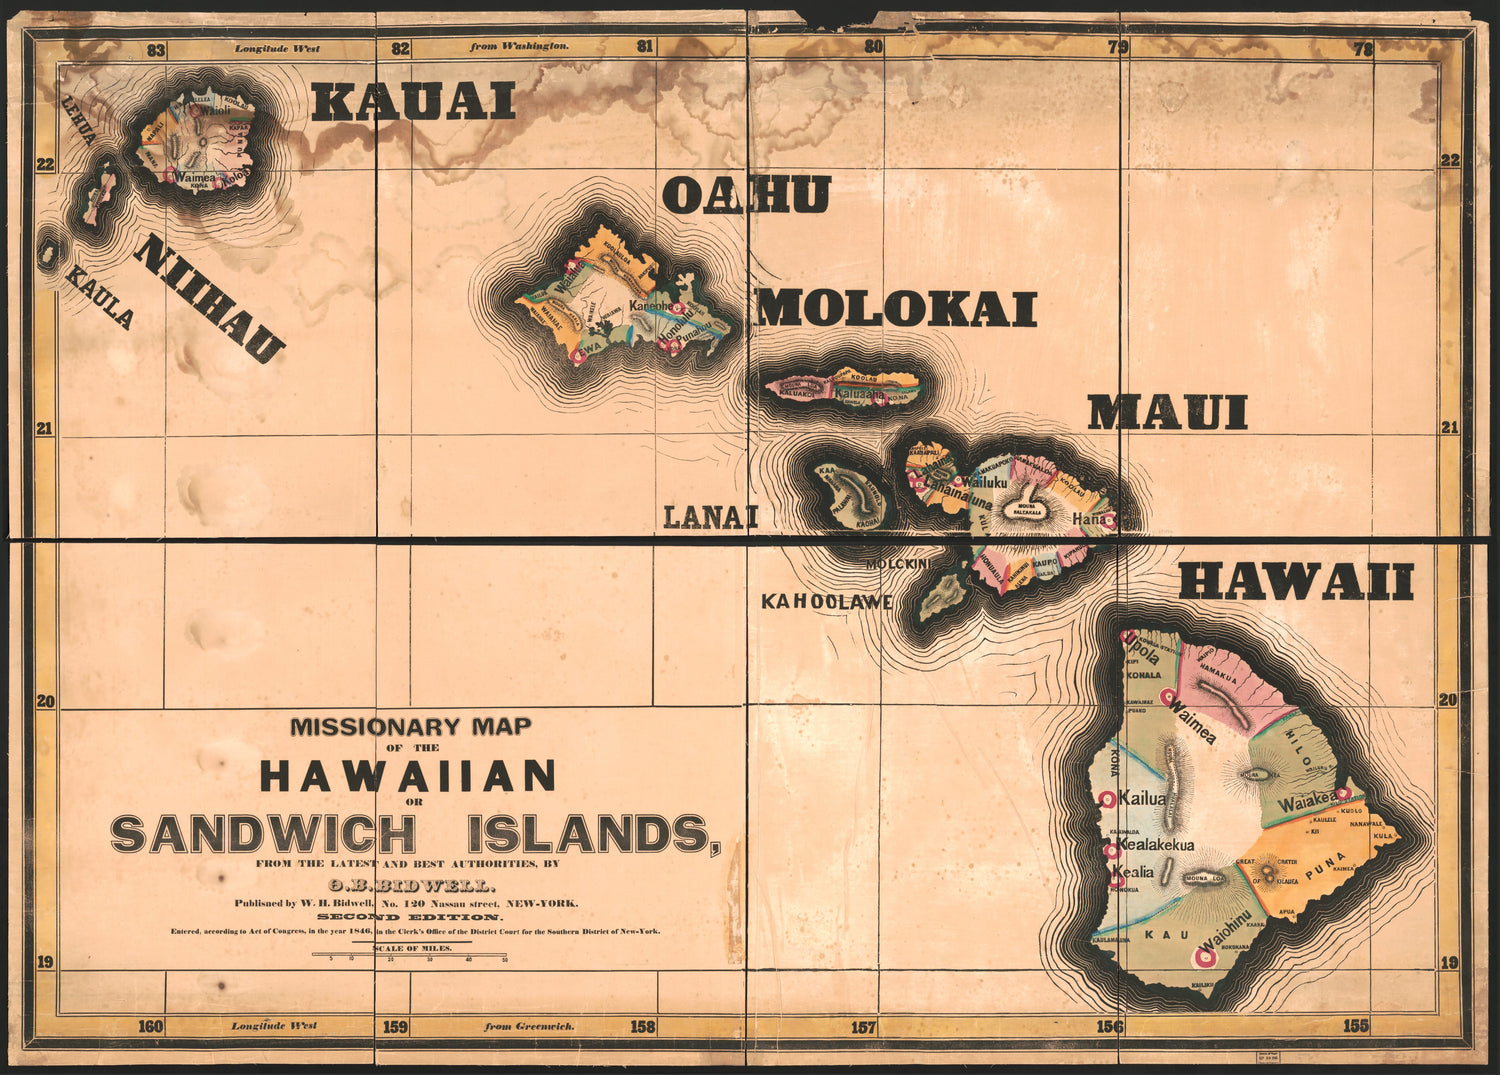 This old map of Missionary Map of the Hawaiian Or Sandwich Islands, from the Latest and Best Authorities from 1846 was created by O. B. (Oliver Beckwith) Bidwell, W. H. (Walter Hilliard) Bidwell in 1846